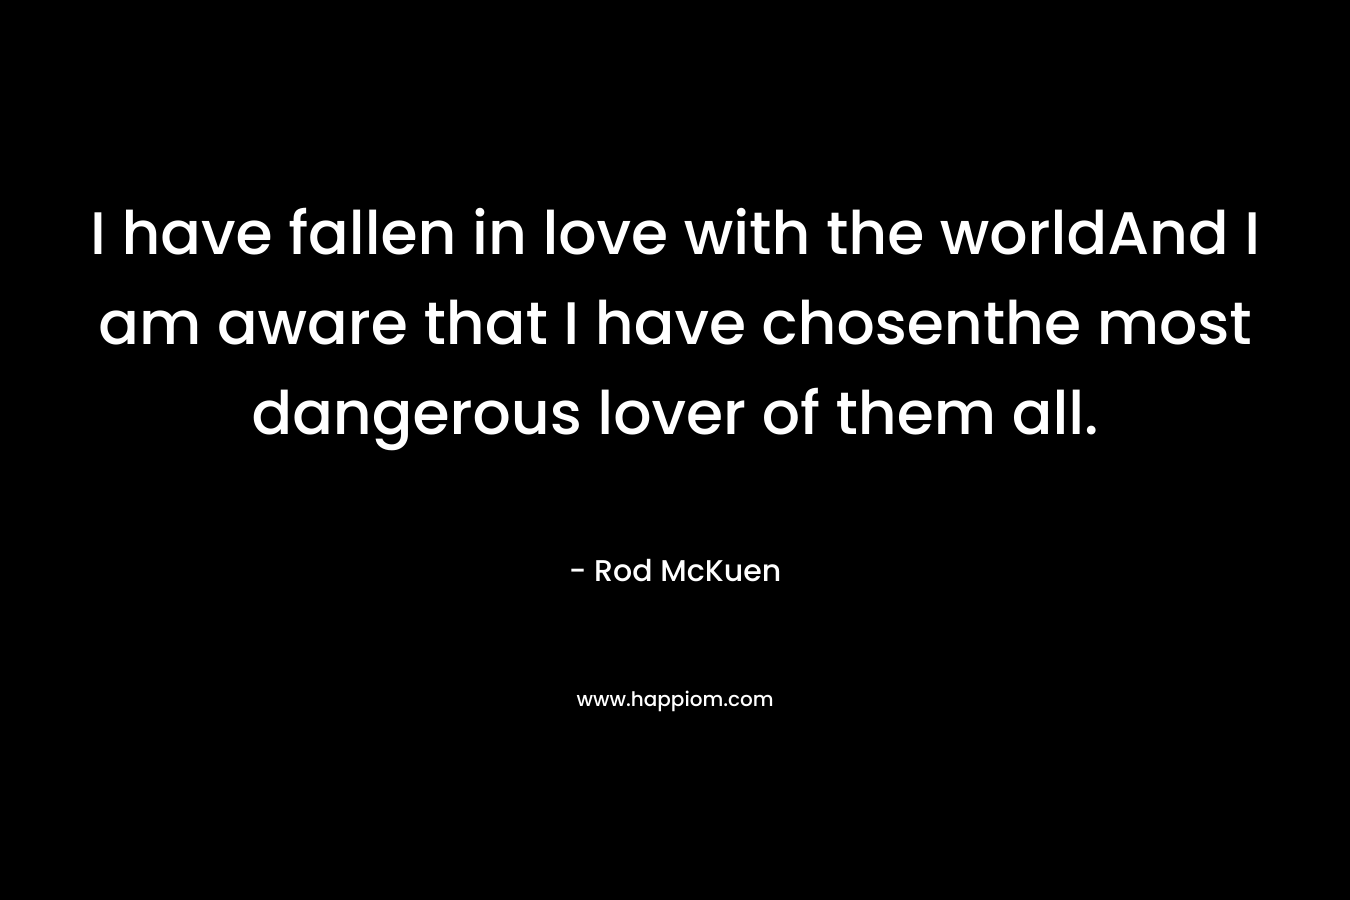 I have fallen in love with the worldAnd I am aware that I have chosenthe most dangerous lover of them all. – Rod McKuen